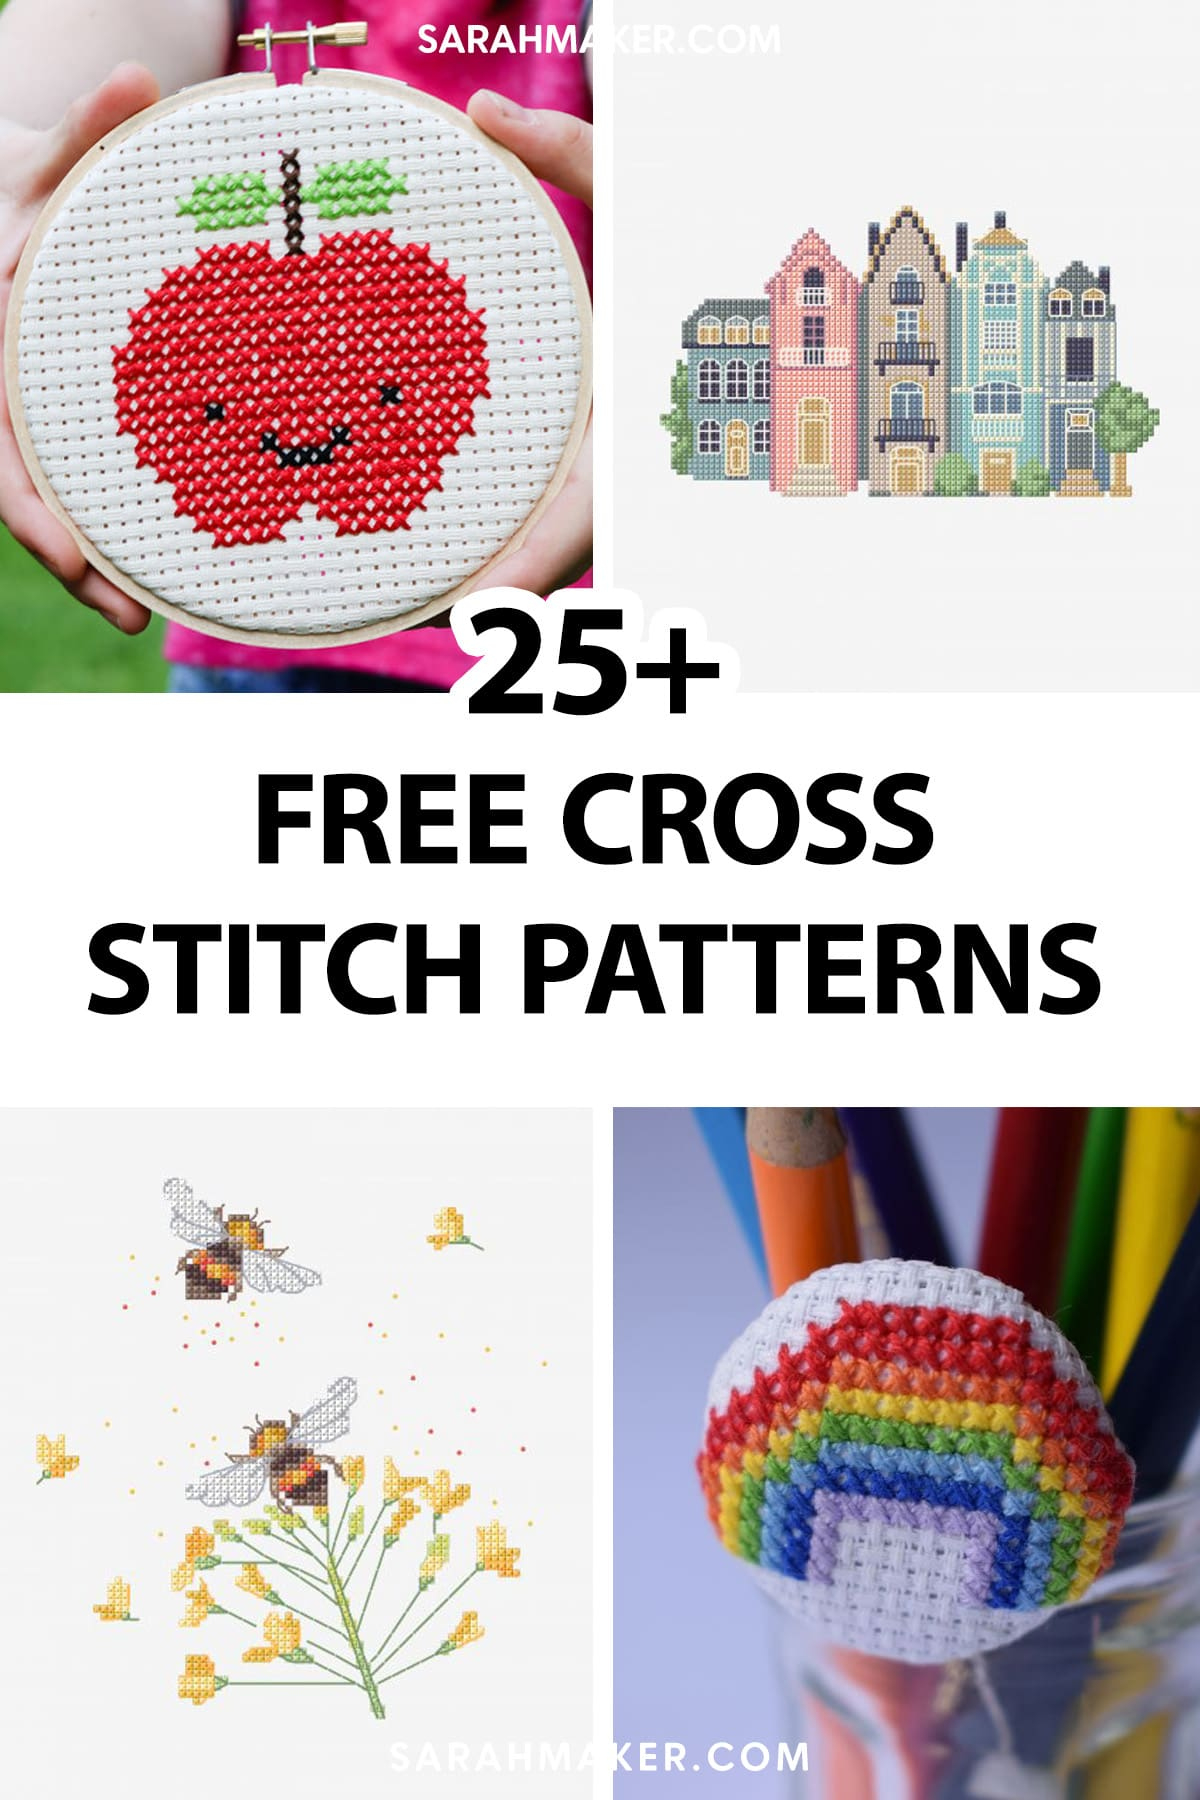 25 Free Cross Stitch Patterns For All Skill Levels - Sarah Maker pertaining to Cross Stitch Patterns Free Printable